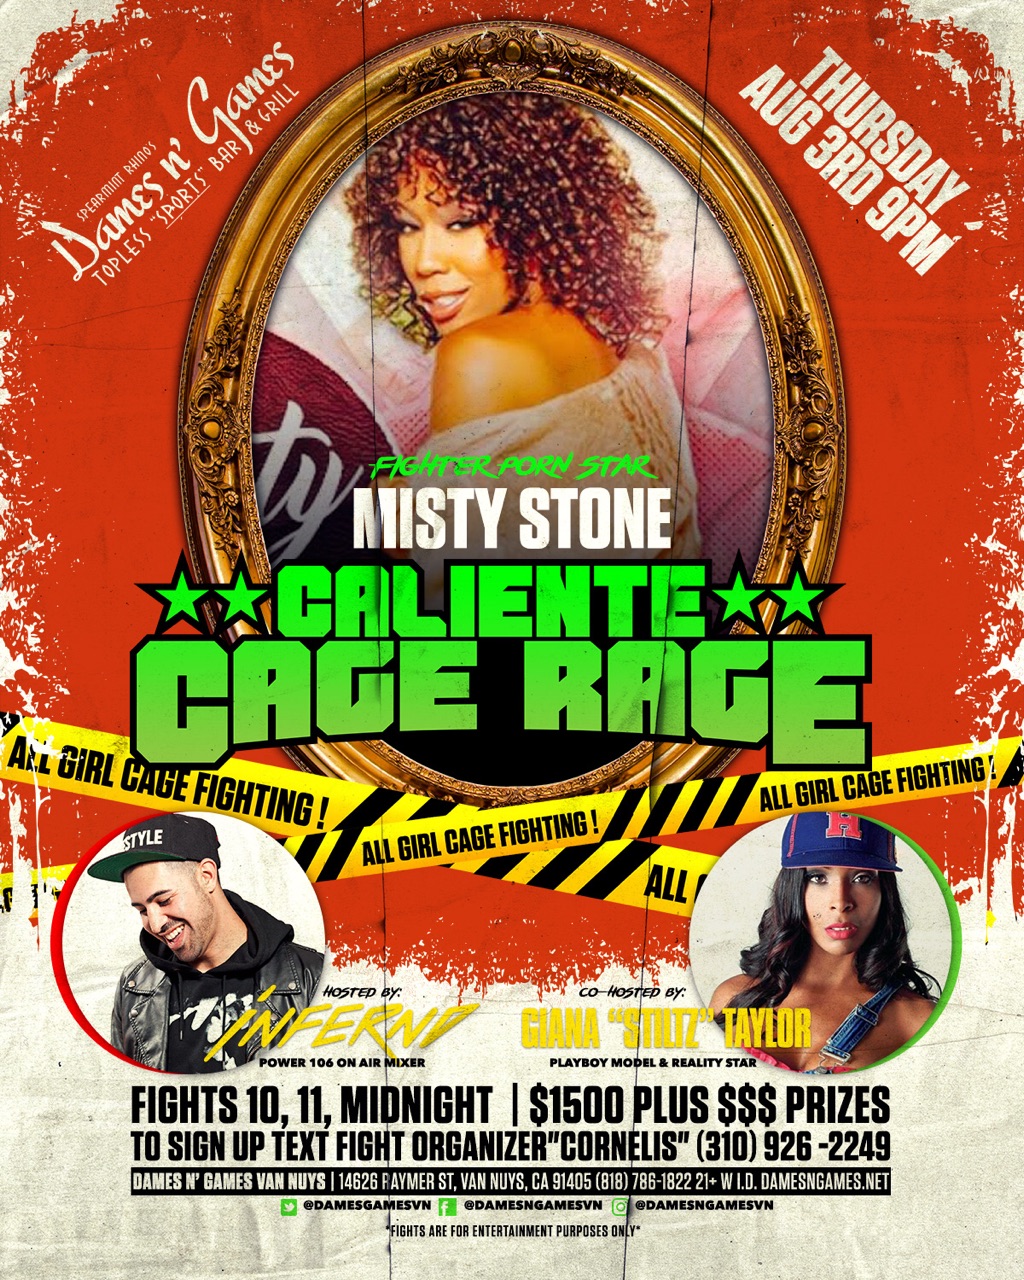 “Misty Stone is the Main Event Tonite at Caliente Cage Rage”